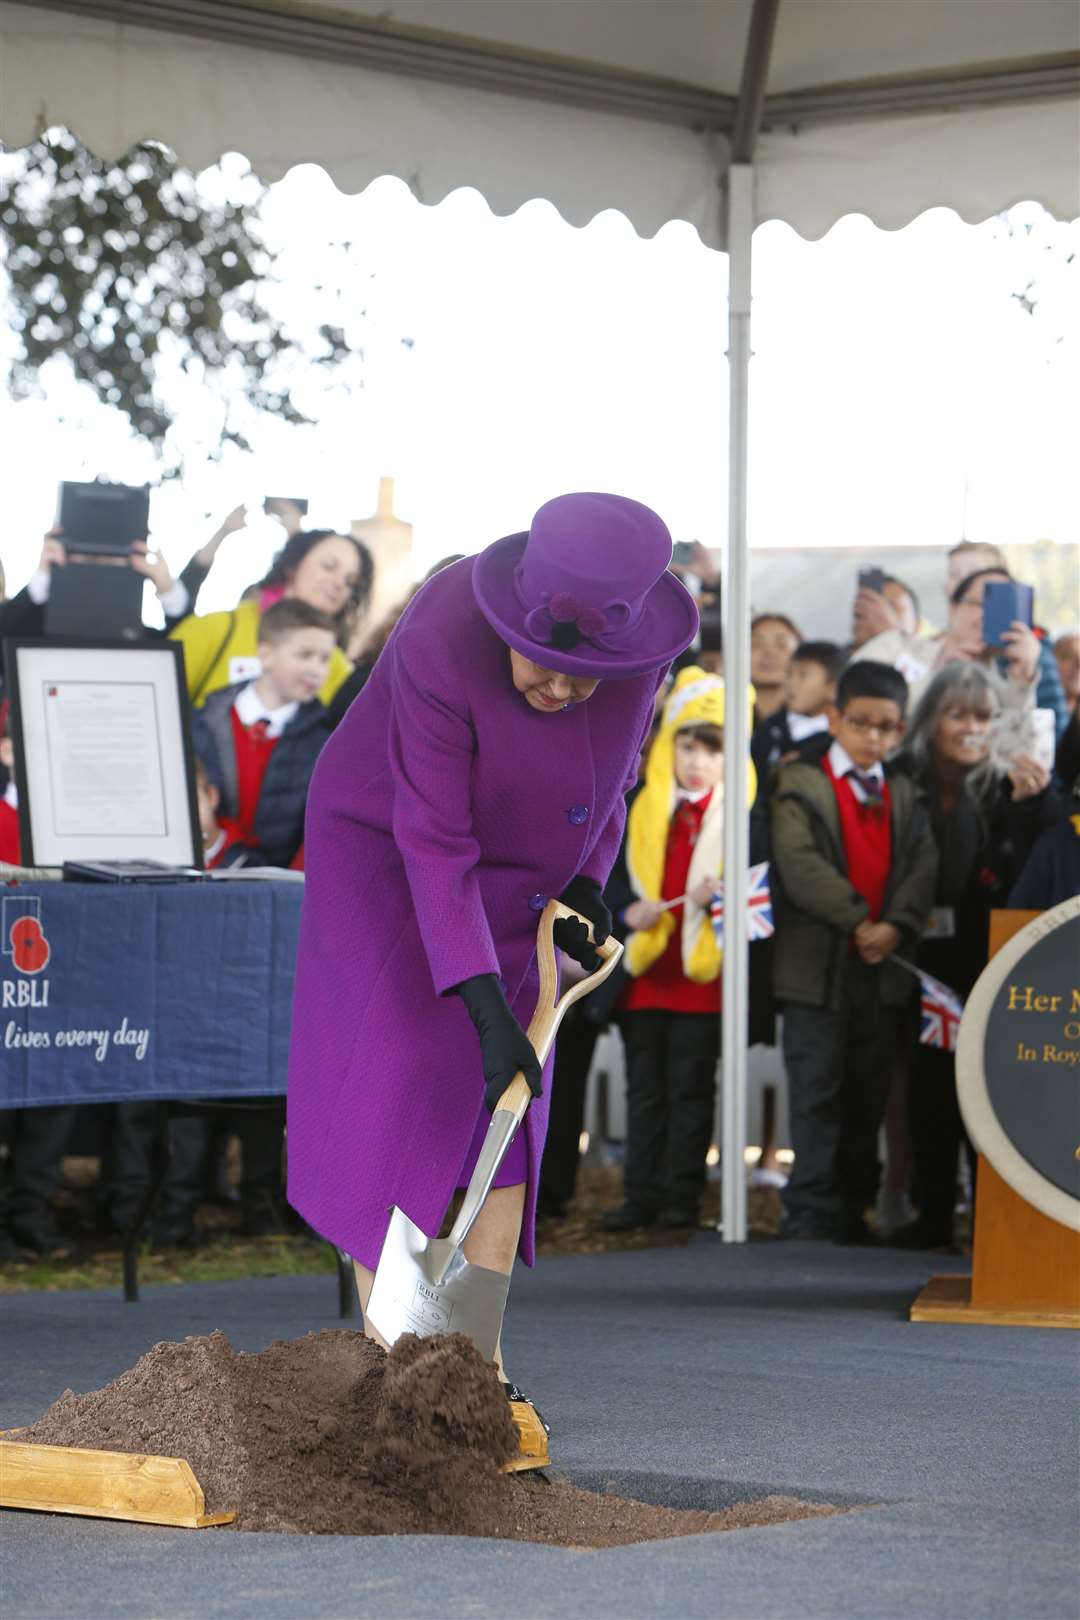 Her Majesty The Queen getting invovled when she visited the RBLI village last year.Picture: Andy Jones